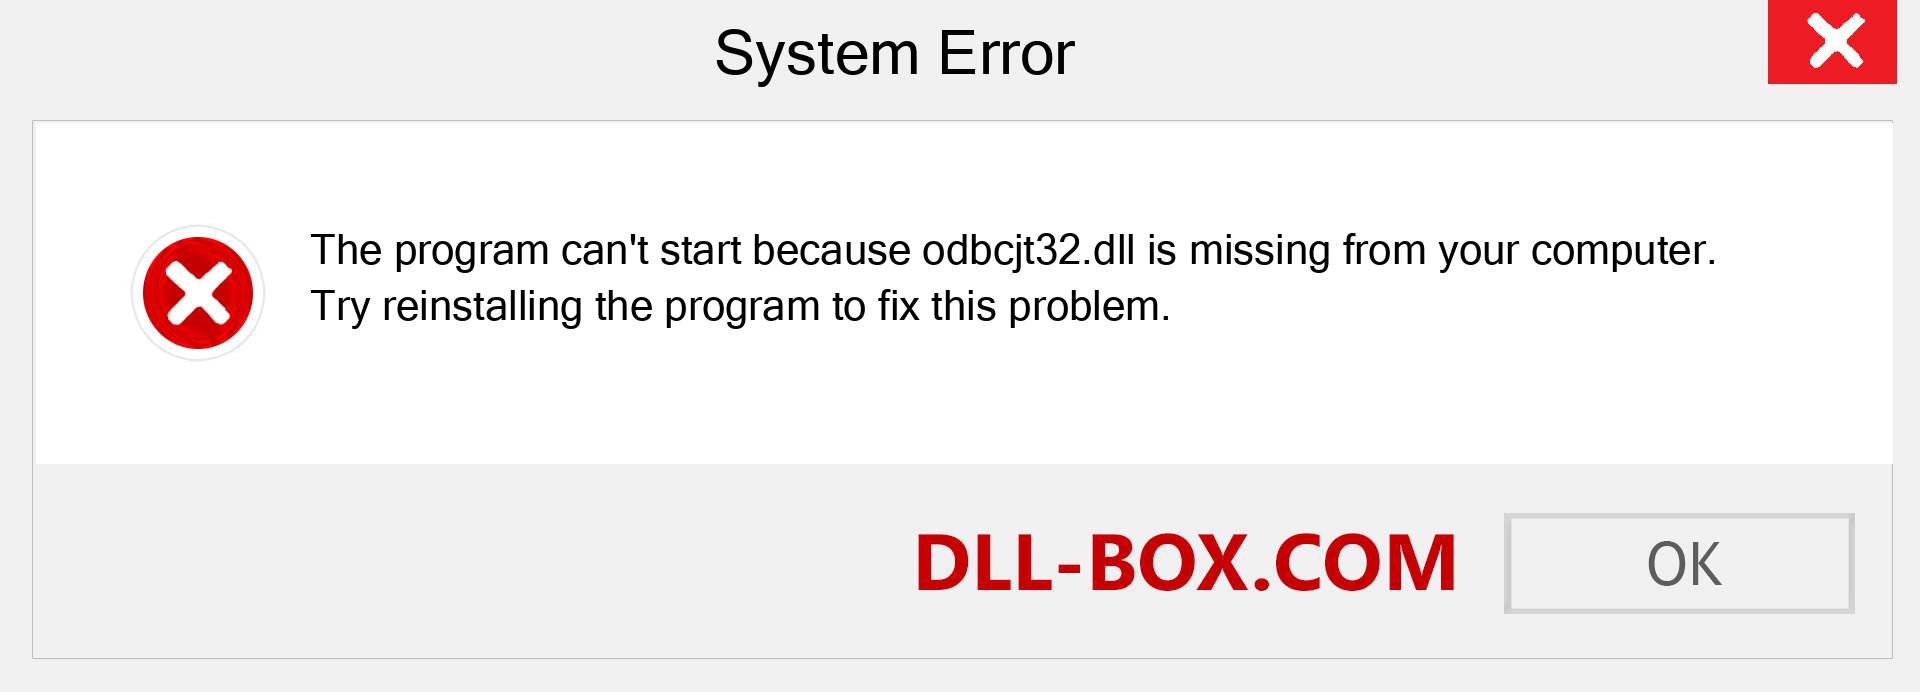  odbcjt32.dll file is missing?. Download for Windows 7, 8, 10 - Fix  odbcjt32 dll Missing Error on Windows, photos, images